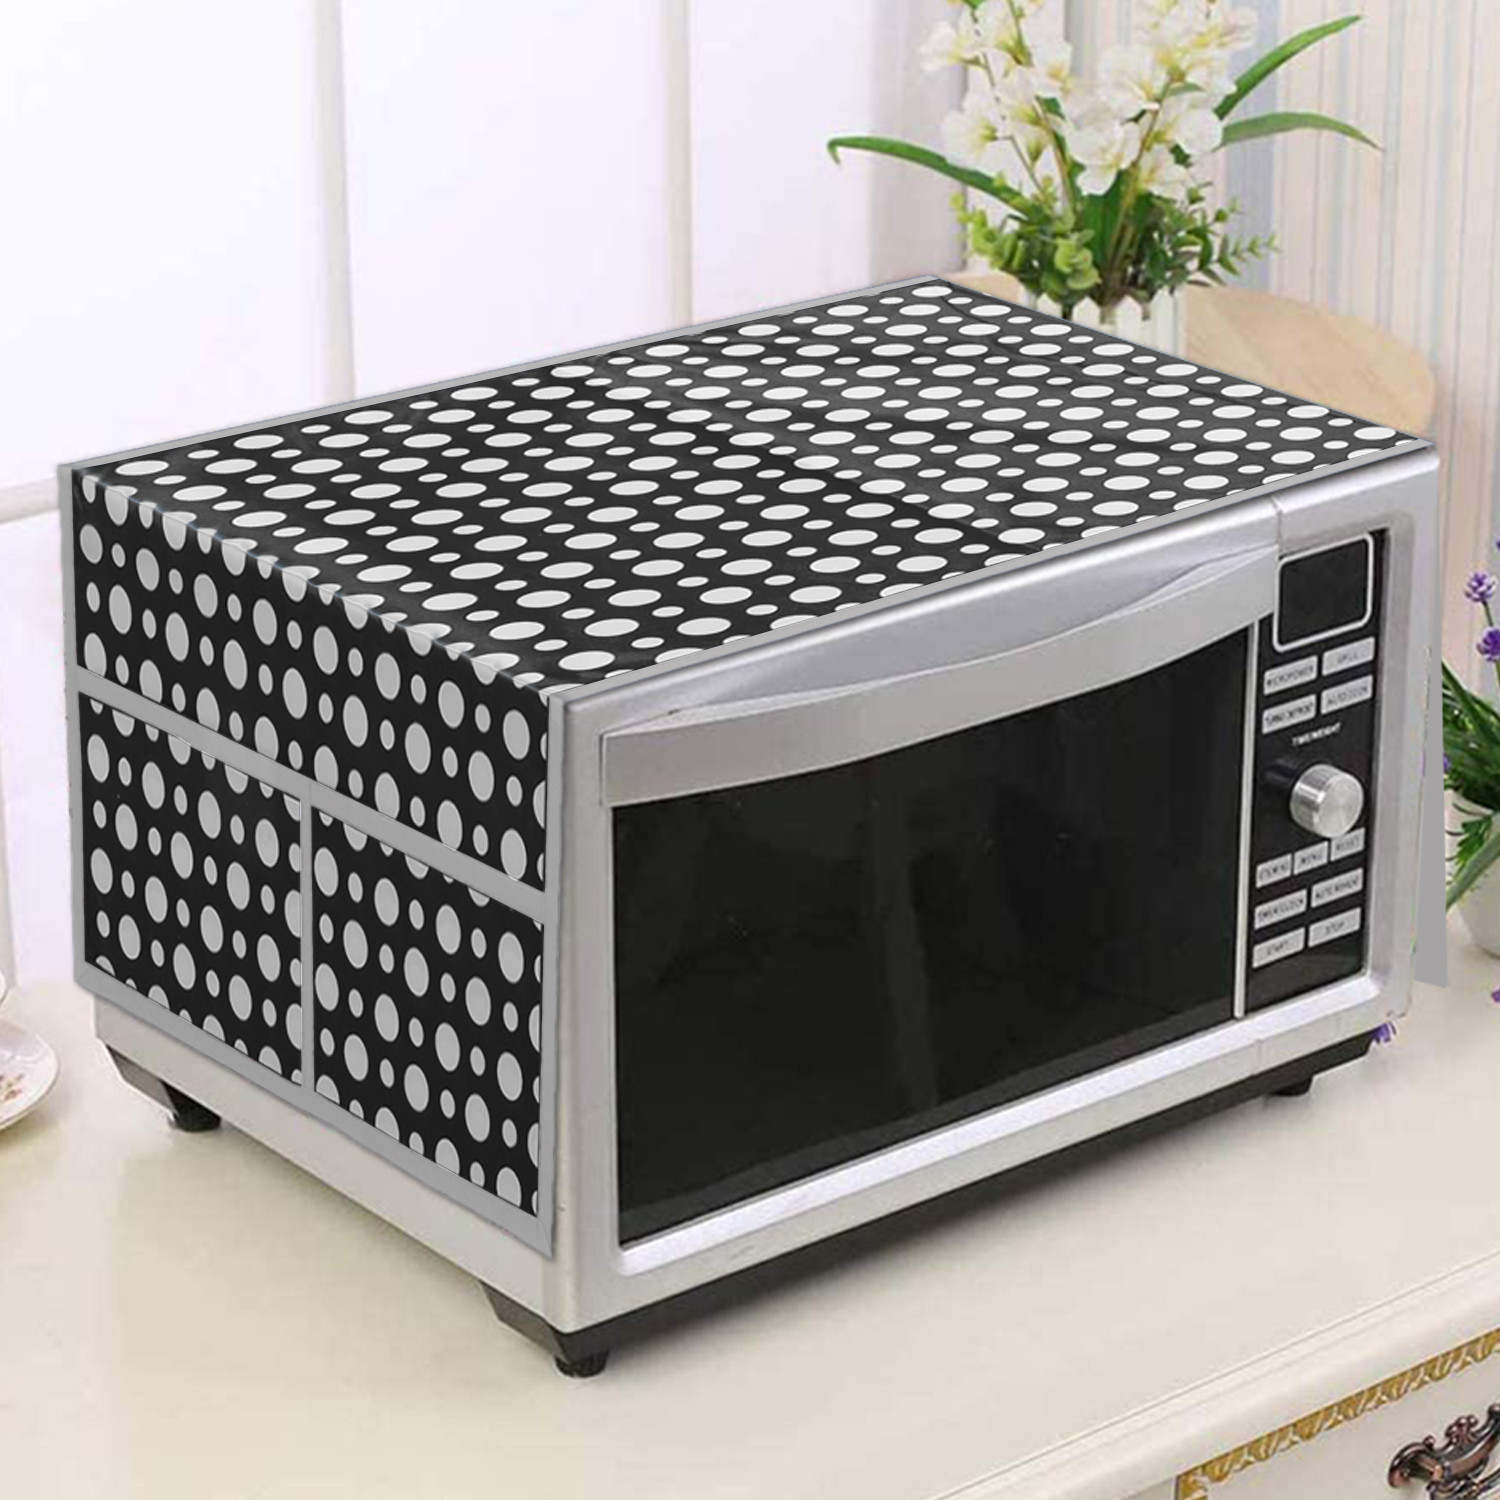 Kuber Industries Dot Printed PVC Decorative Microwave Oven Top Cover With 4 Utility Pockets (Black)